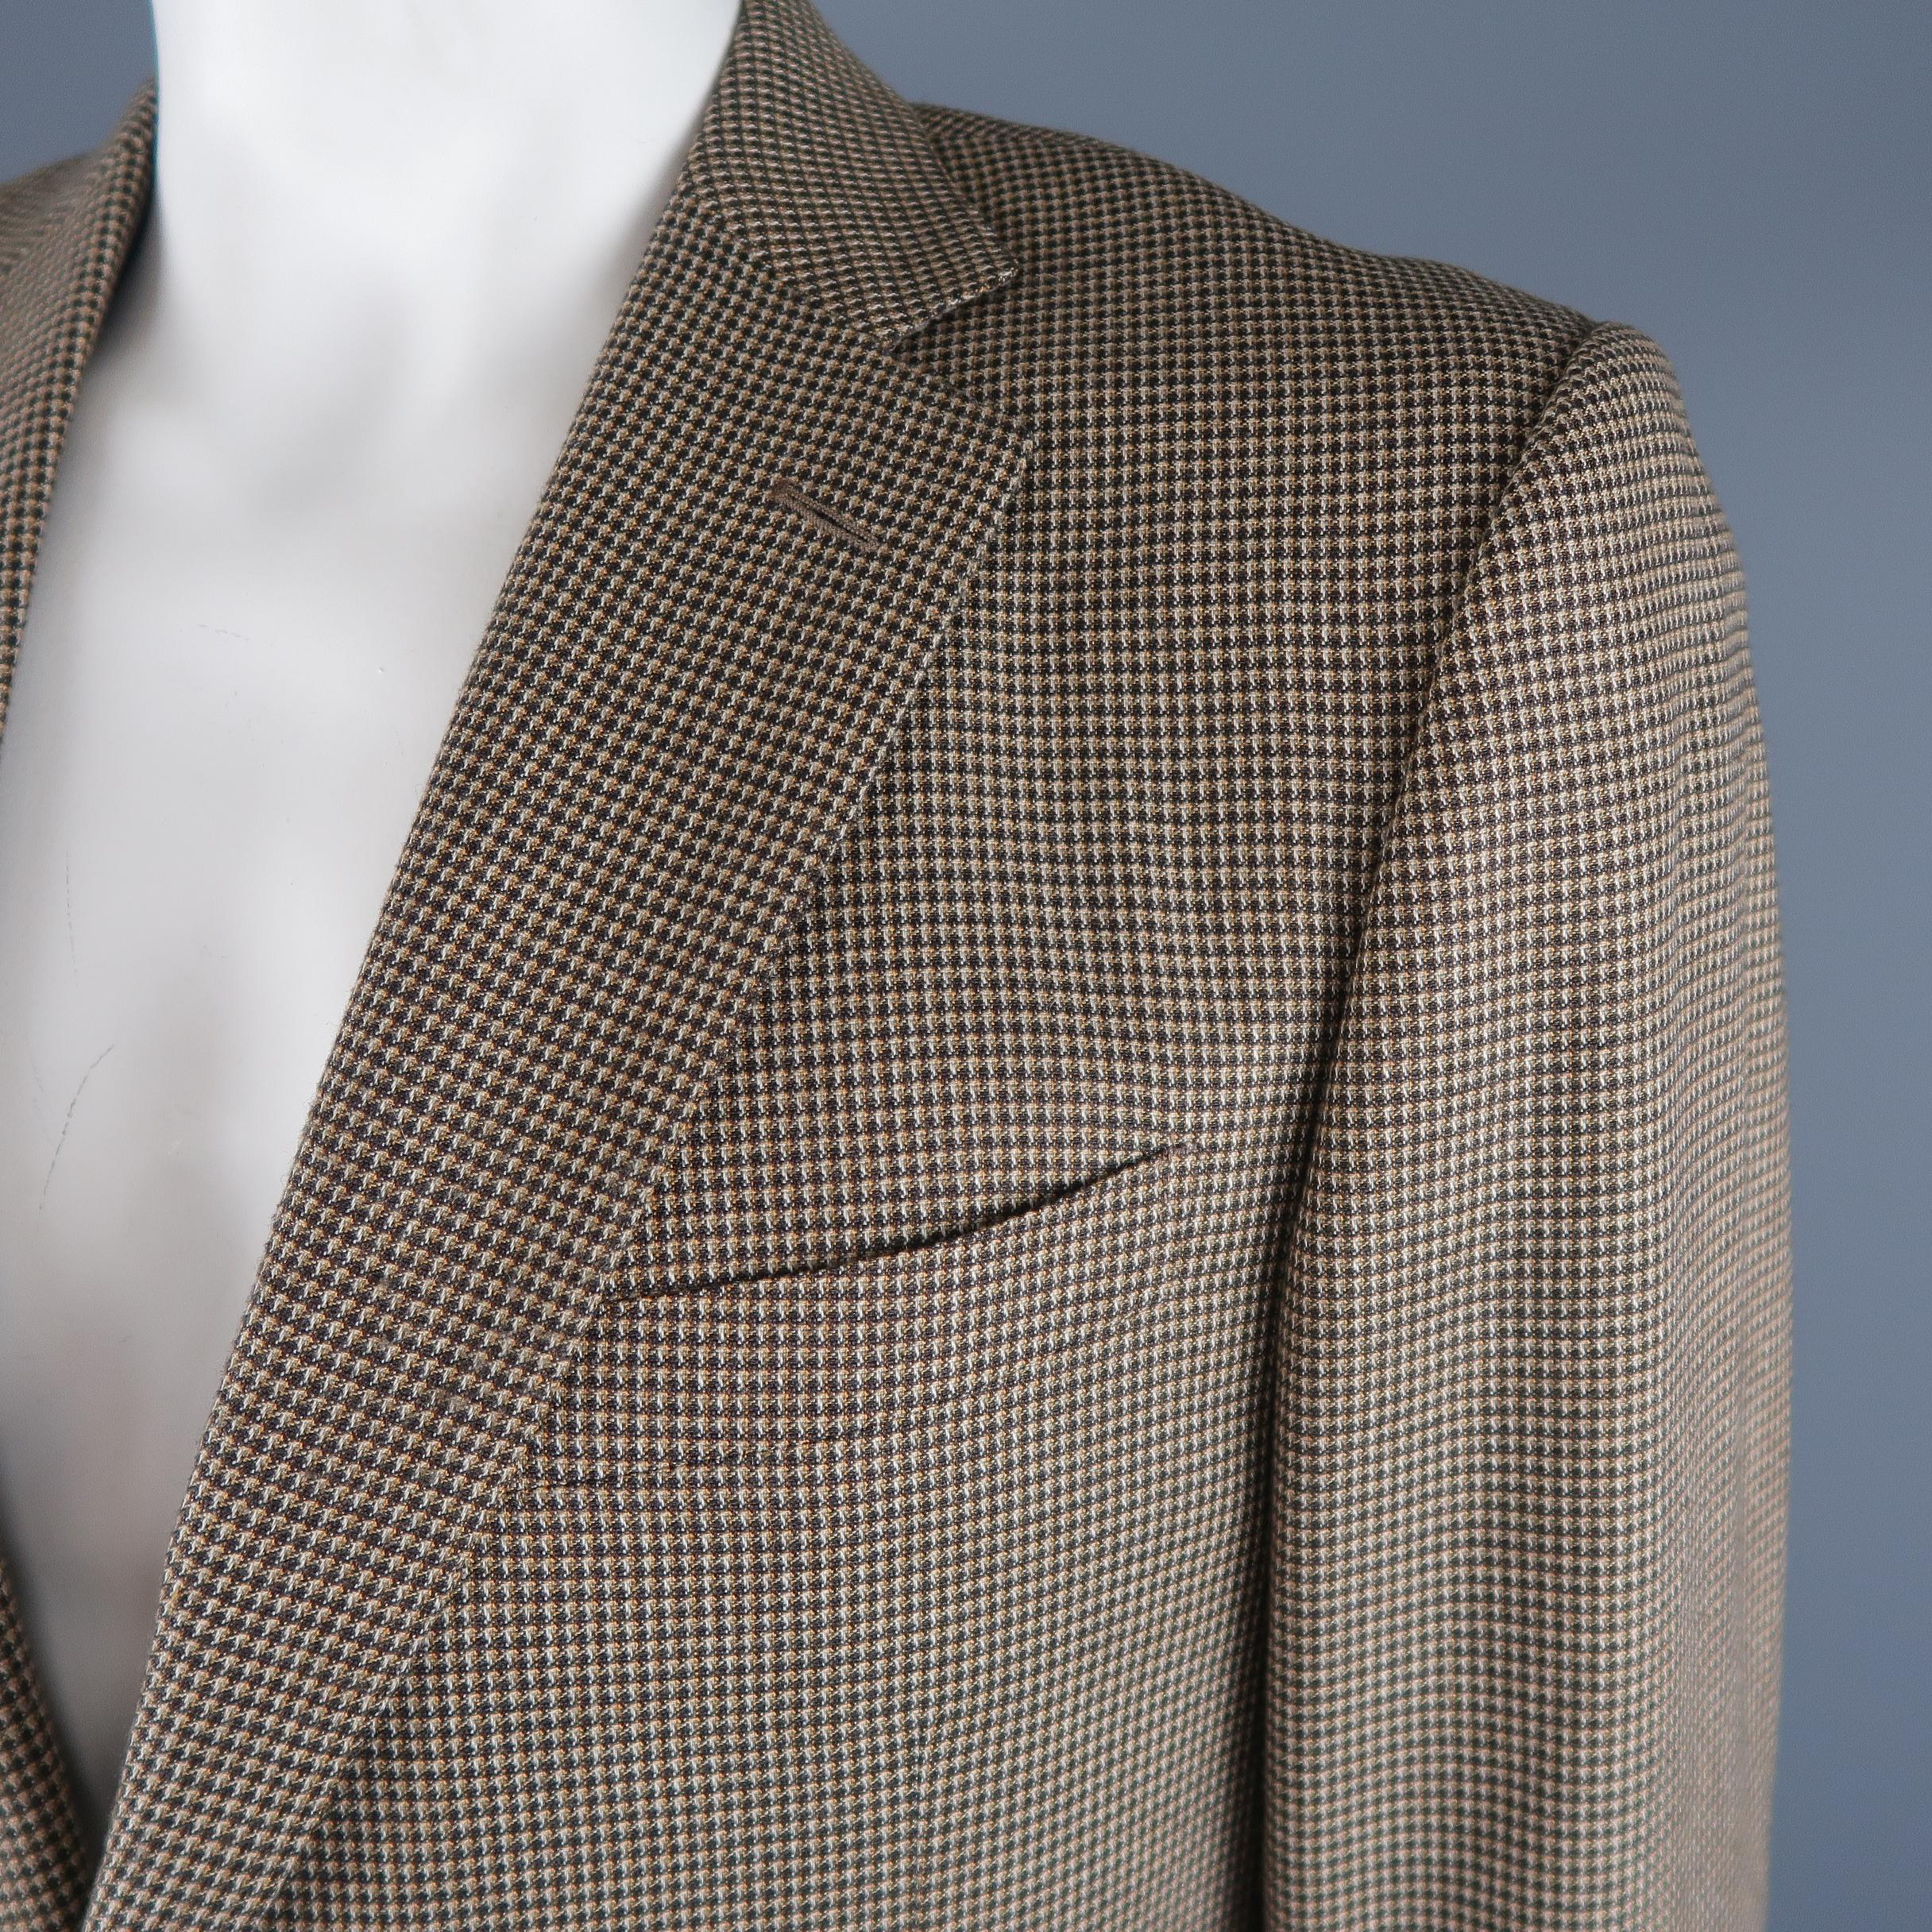 ERMENEGILDO ZEGNA sport coat comes in beige nailhead grid print silk cashmere blend with a notch lapel, with a two button single breasted closure, and double vented back. Made in Switzerland.
 
Excellent Pre-Owned Condition.
Marked: IT 54
